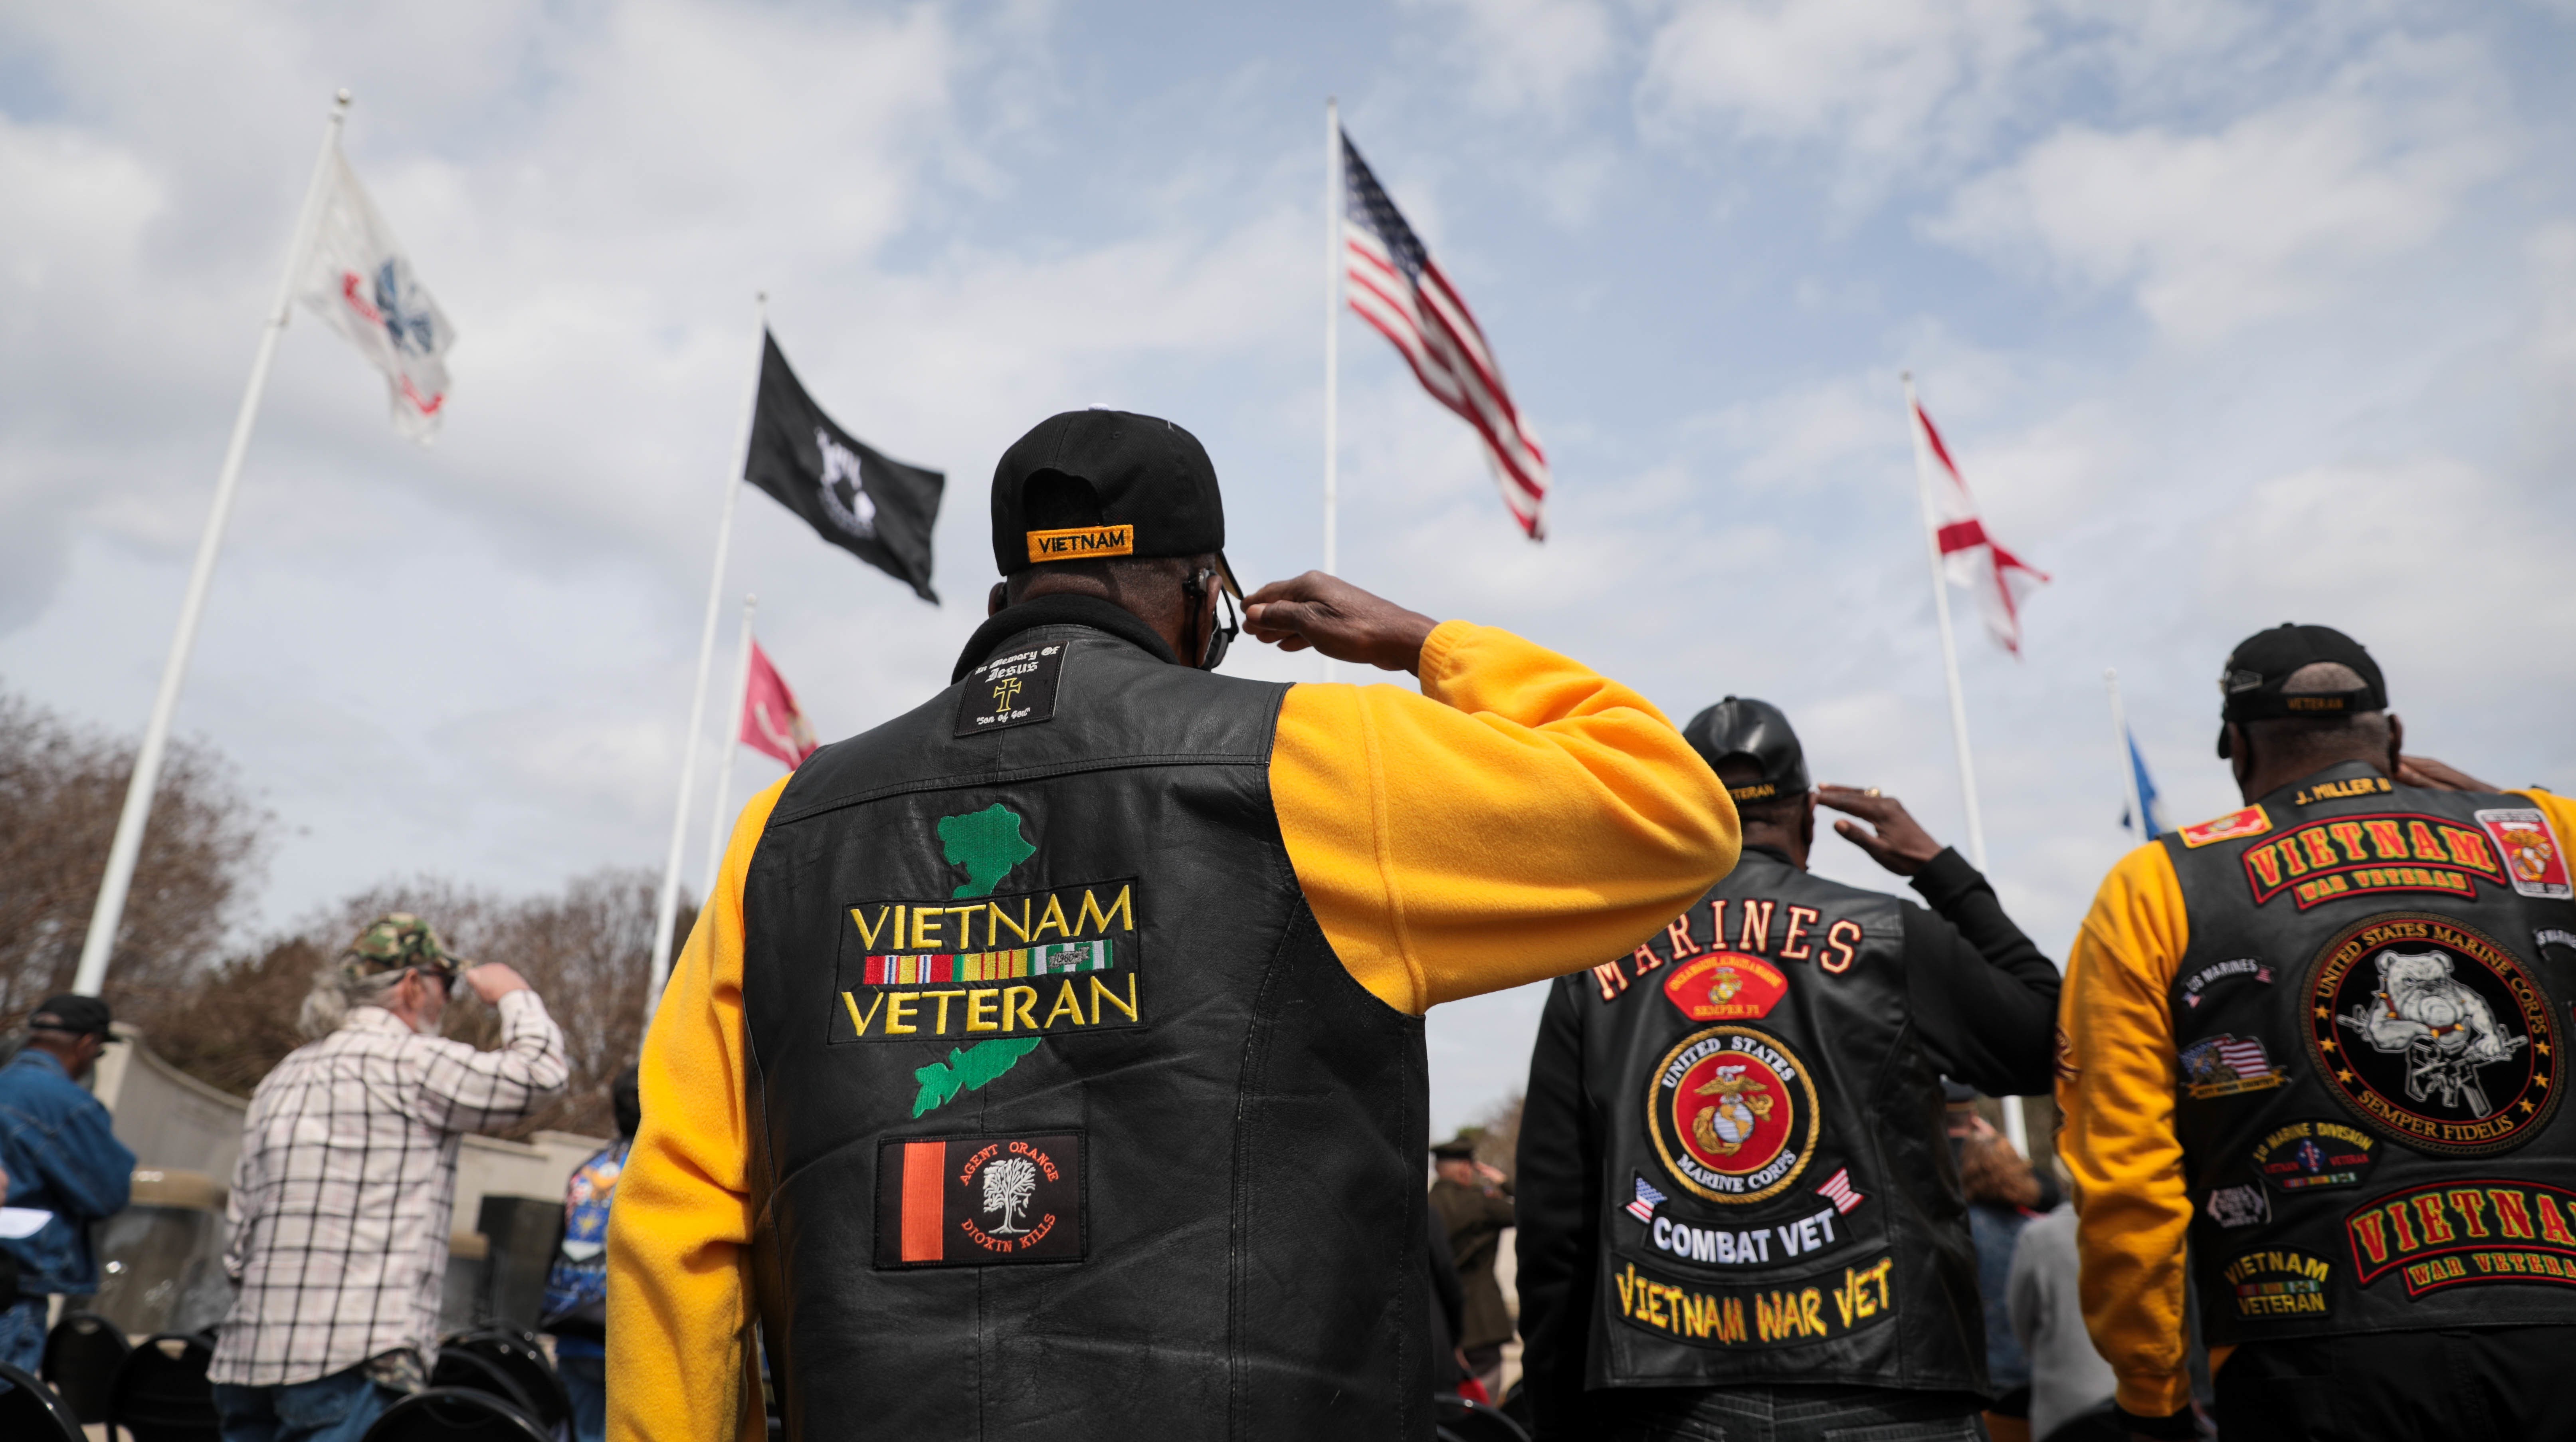 Vietnam veterans honored at event on historic day Article The